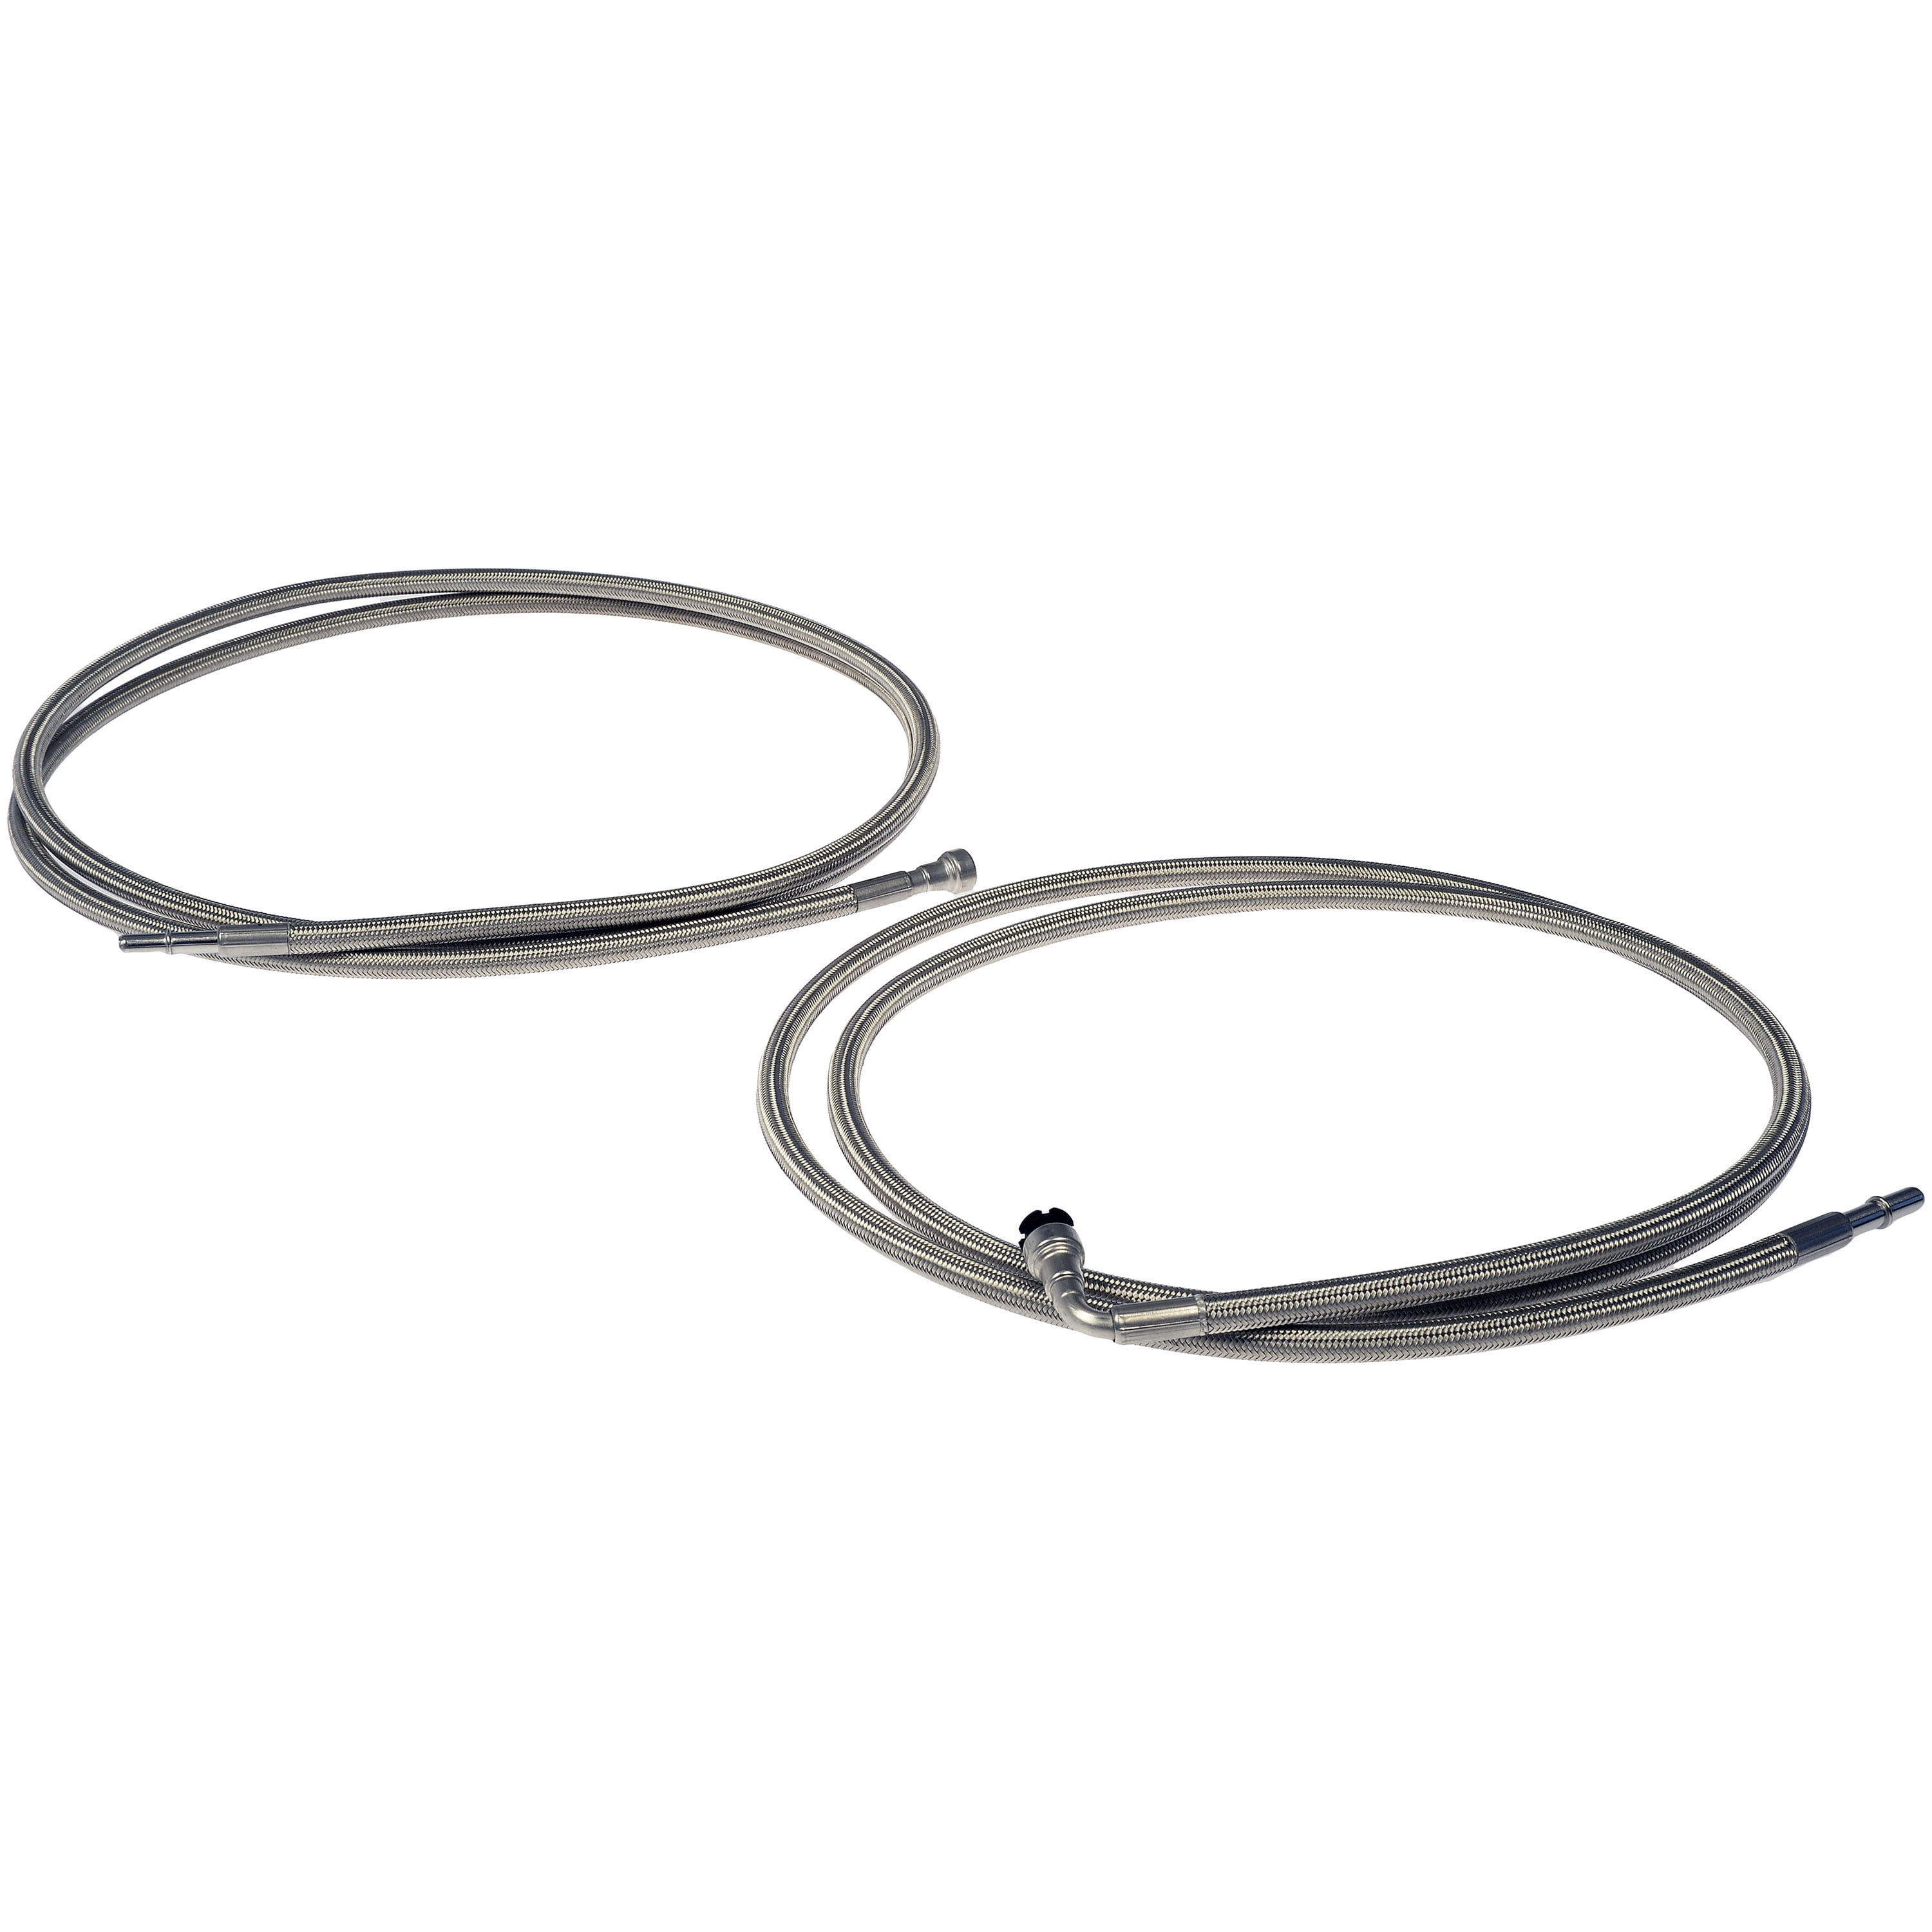 Dorman 919-845 Front Stainless Steel Fuel Line Kit for Specific